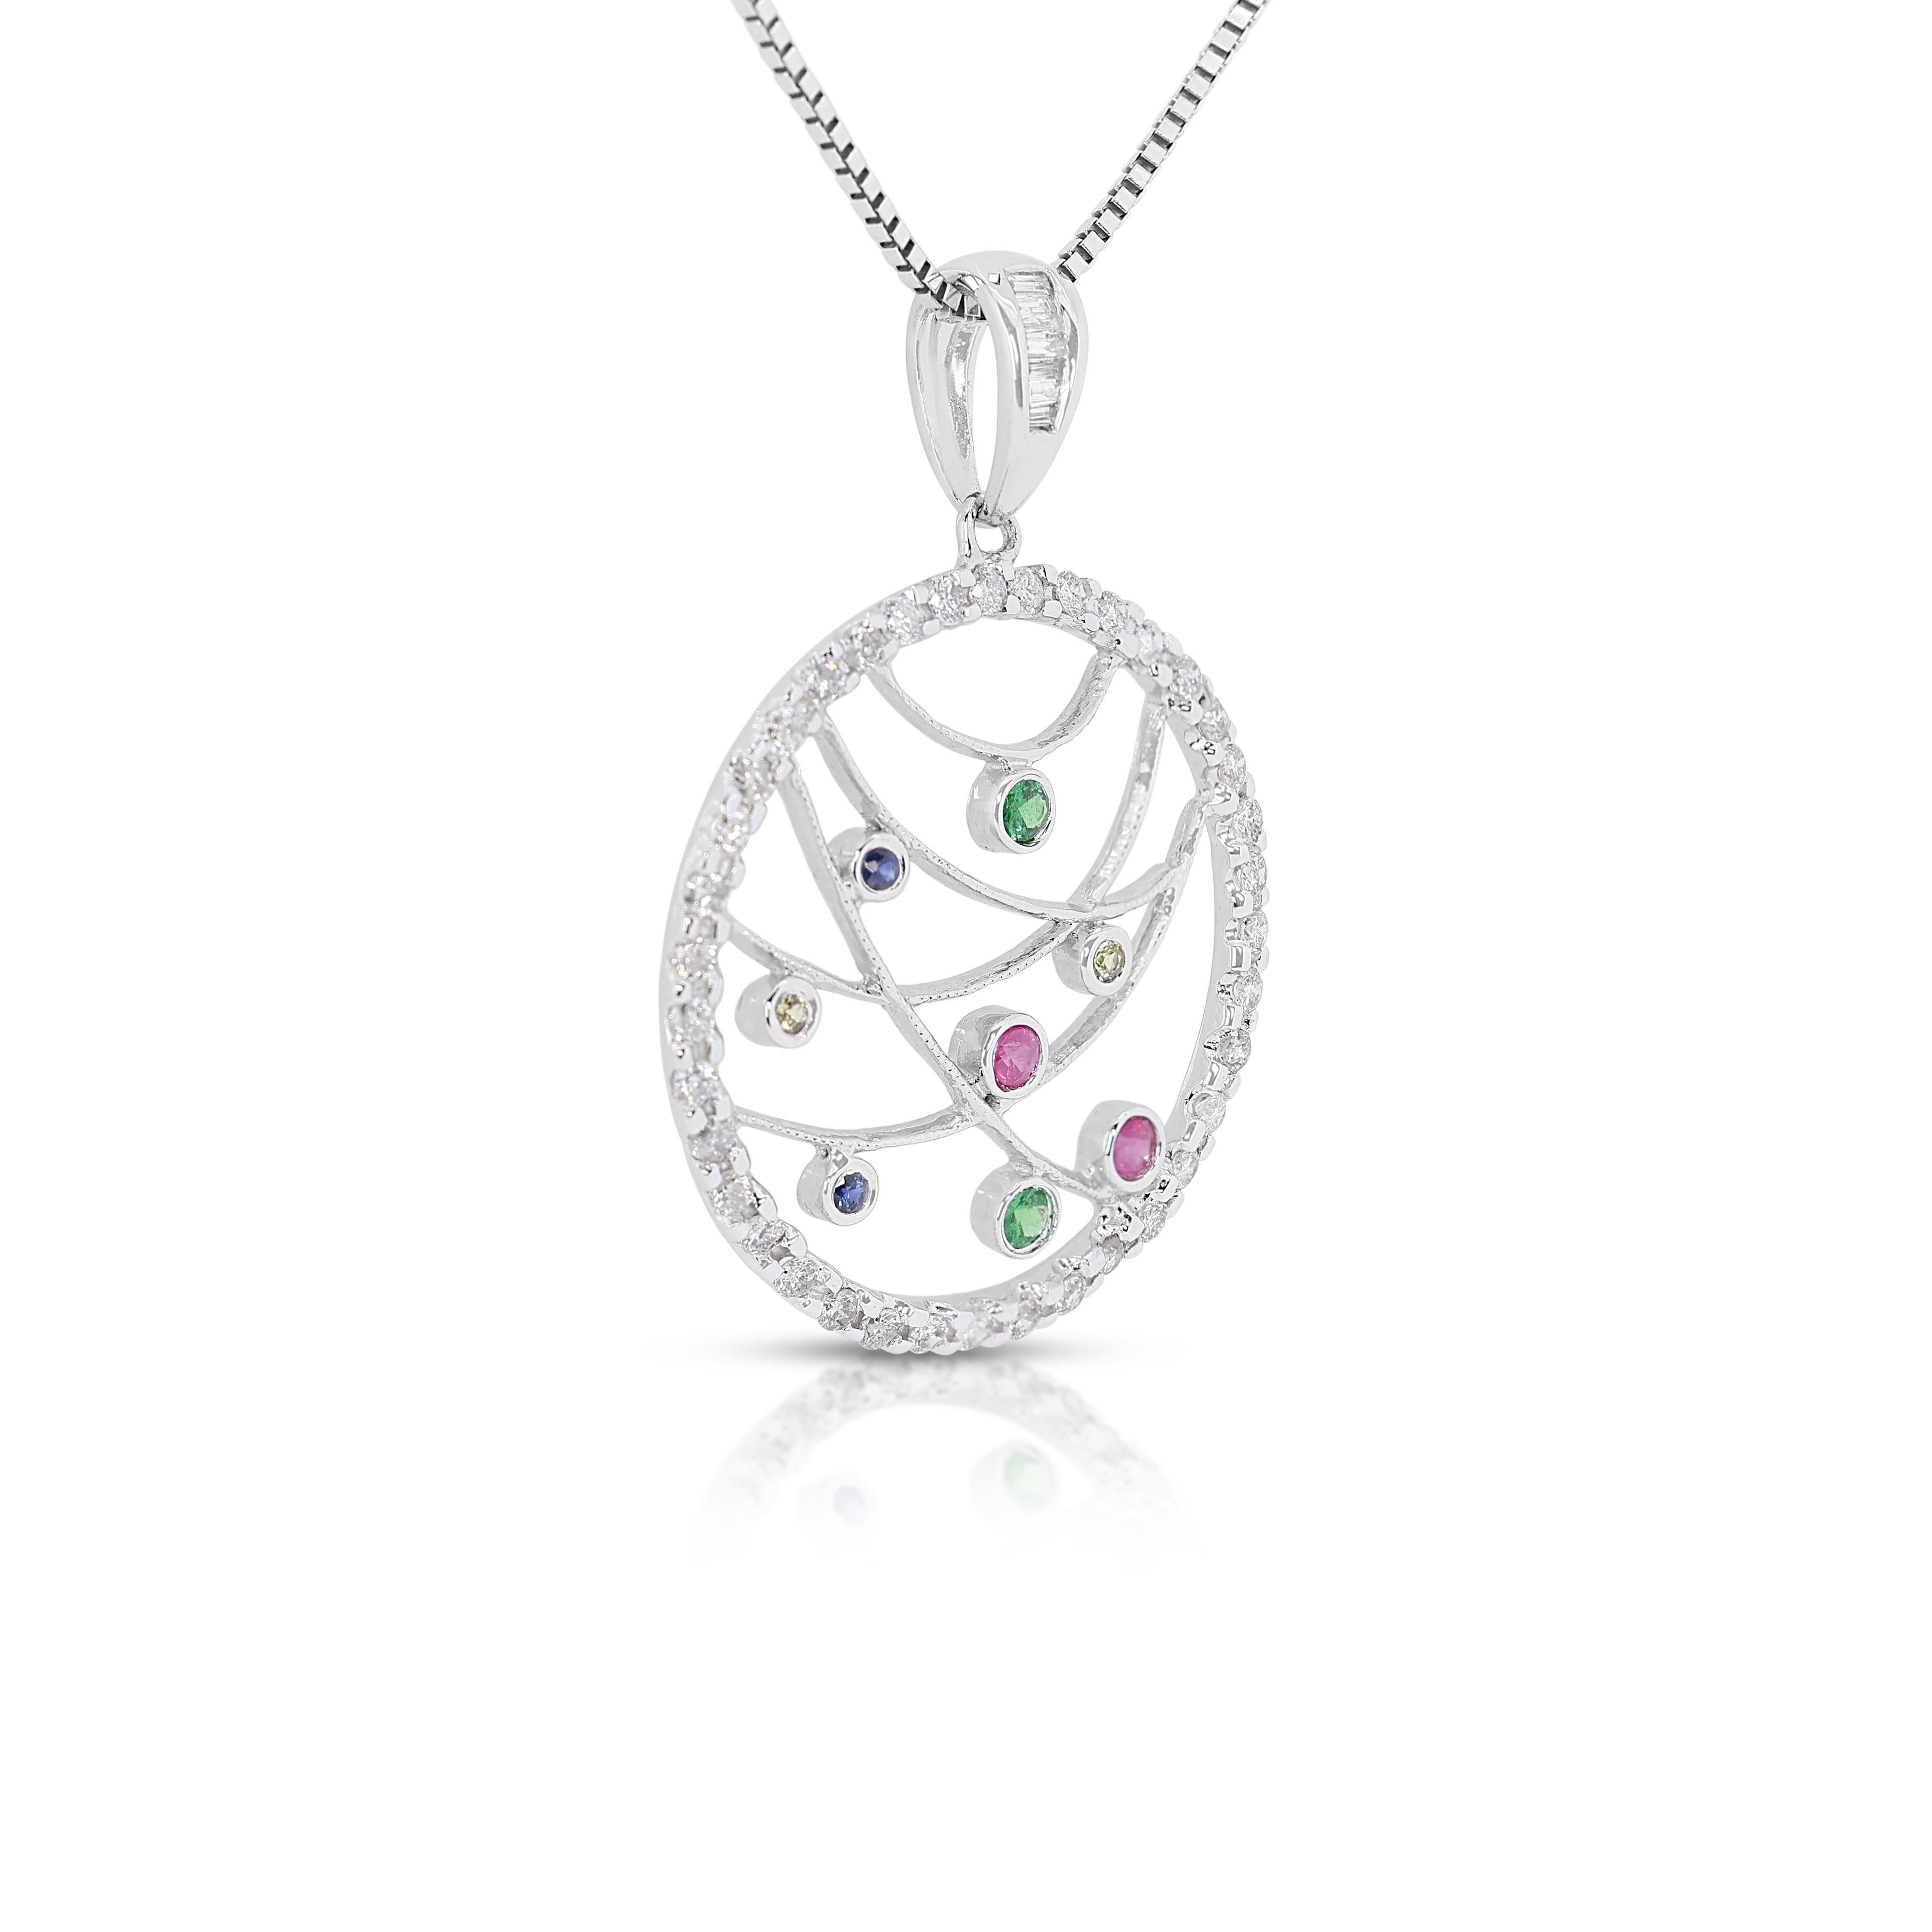 Round Cut Dazzling 0.62ct Mixed Stones w/ Diamonds in 18K White Gold (Chain Not Included) For Sale